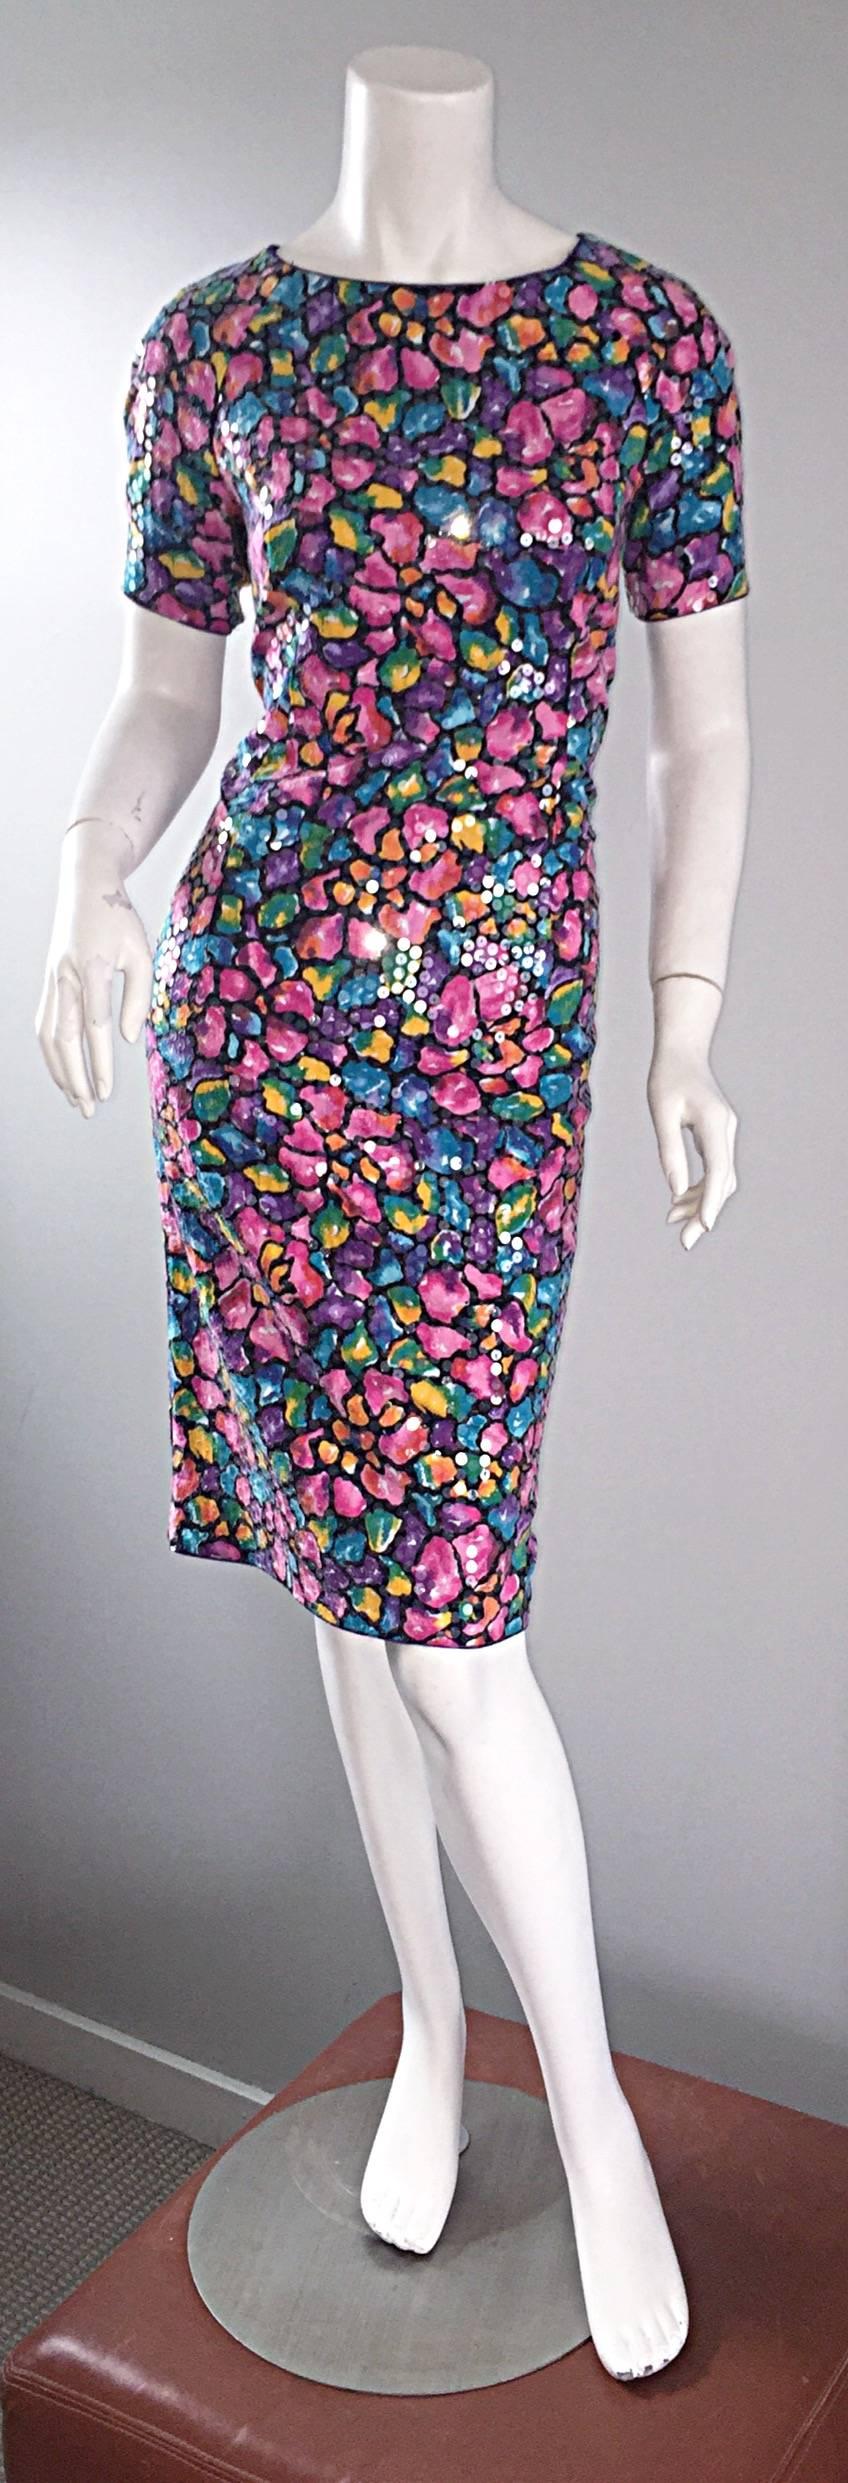 Beautiful vintage SAKS 5th Ave 1990s fully sequined dress! Features thousands of iridescent clear sequins throughout the entire dress. Colorful soft cotton, with a pretty flower print. Crisscross back, with snaps (easier to get on and off). Hidden